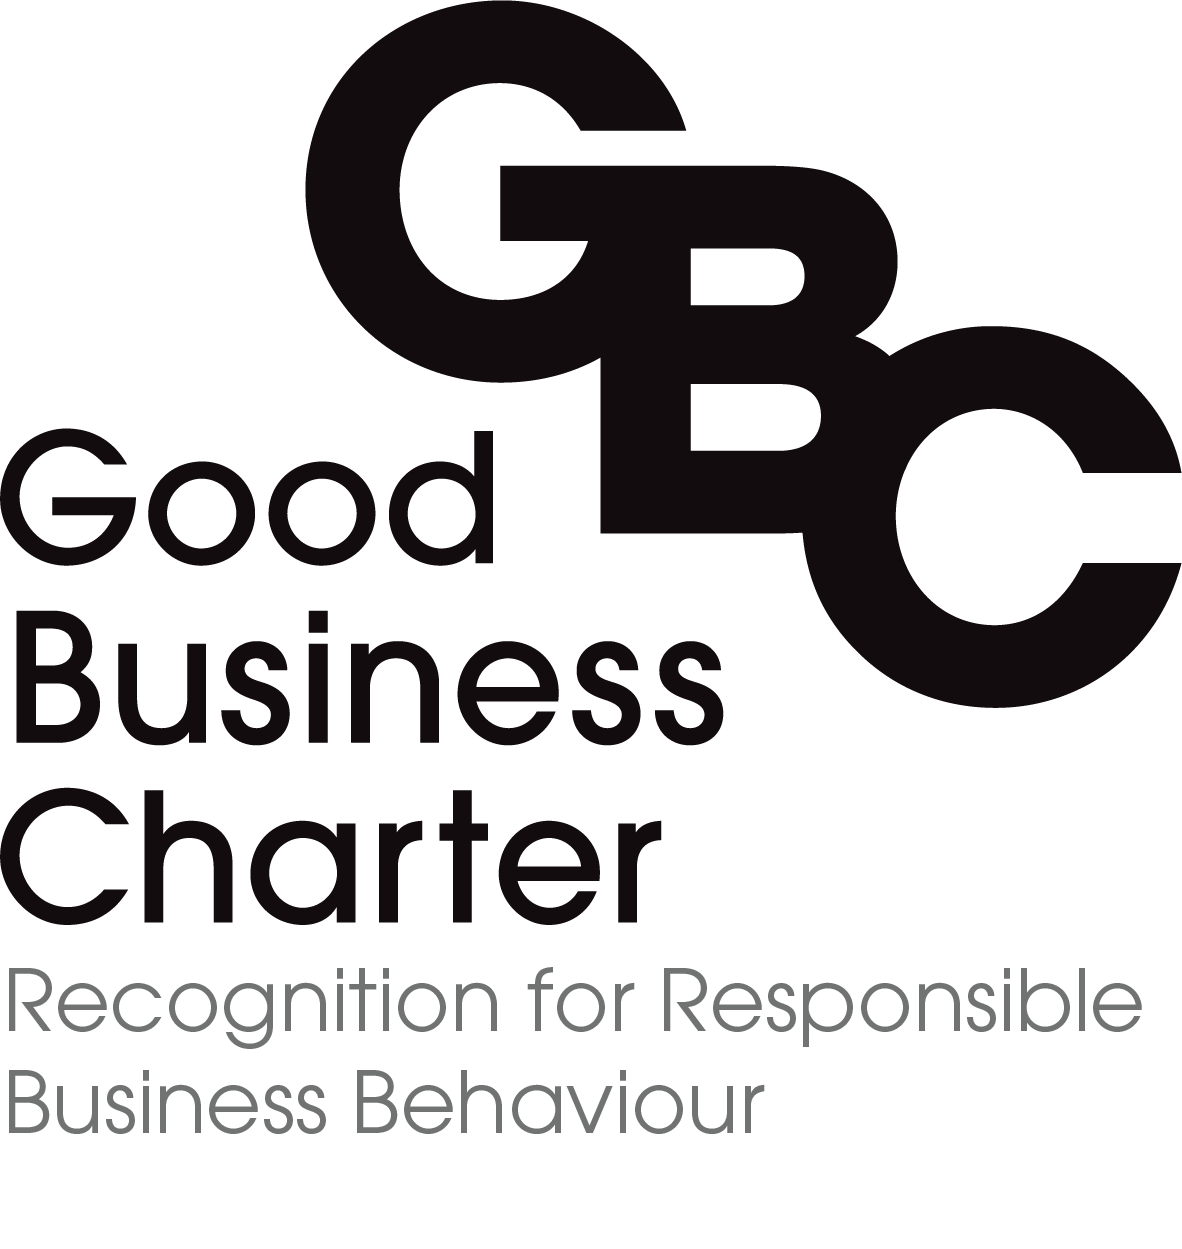 Craft Courses is Certified UK's Good Business Charter